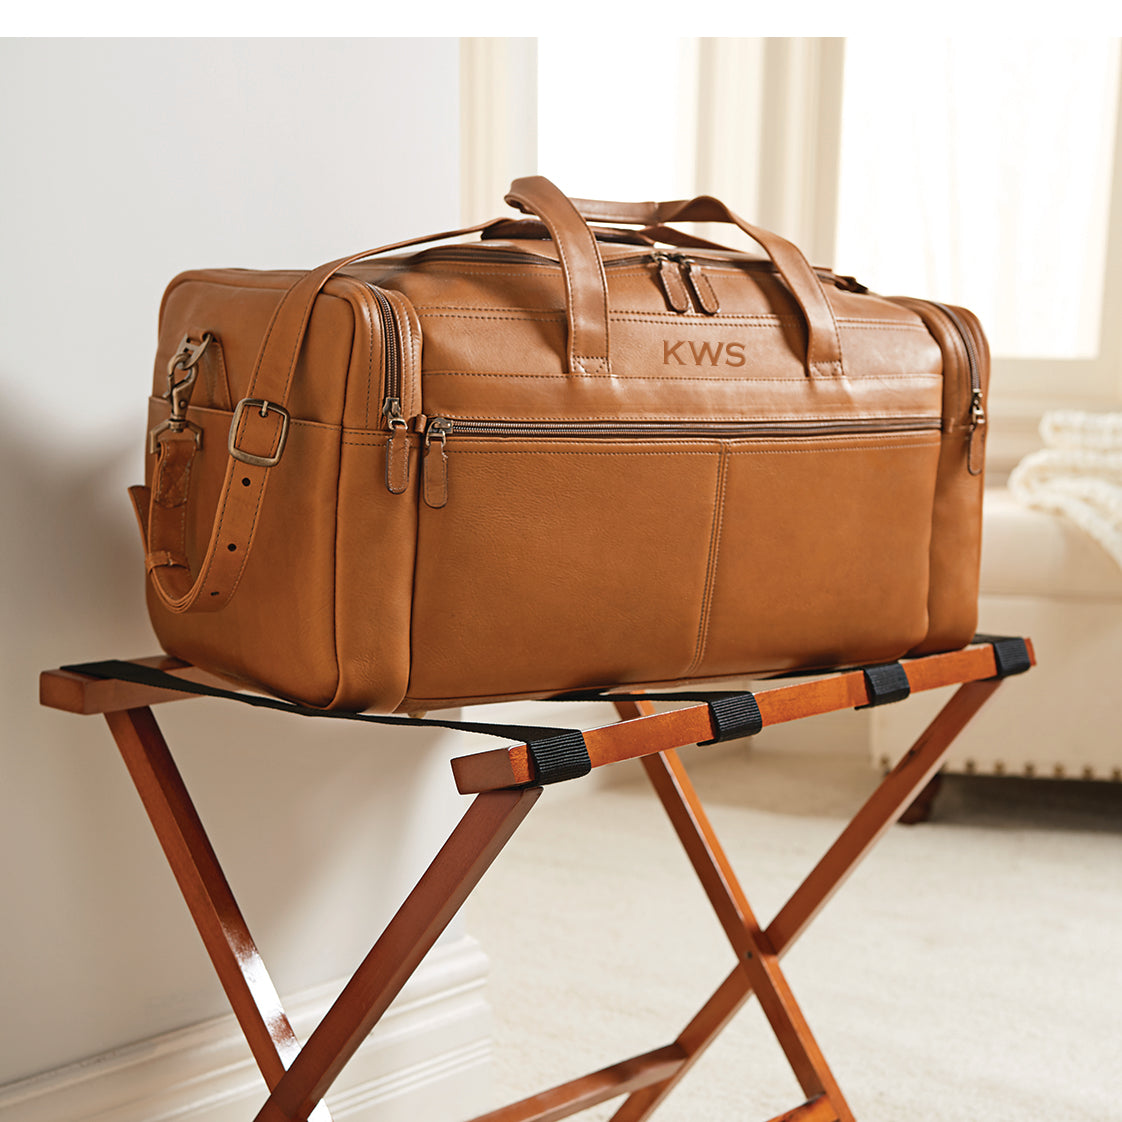 Leather Travel Duffel Bag - Airplane Underseat Carry on Bags, Brown, Size